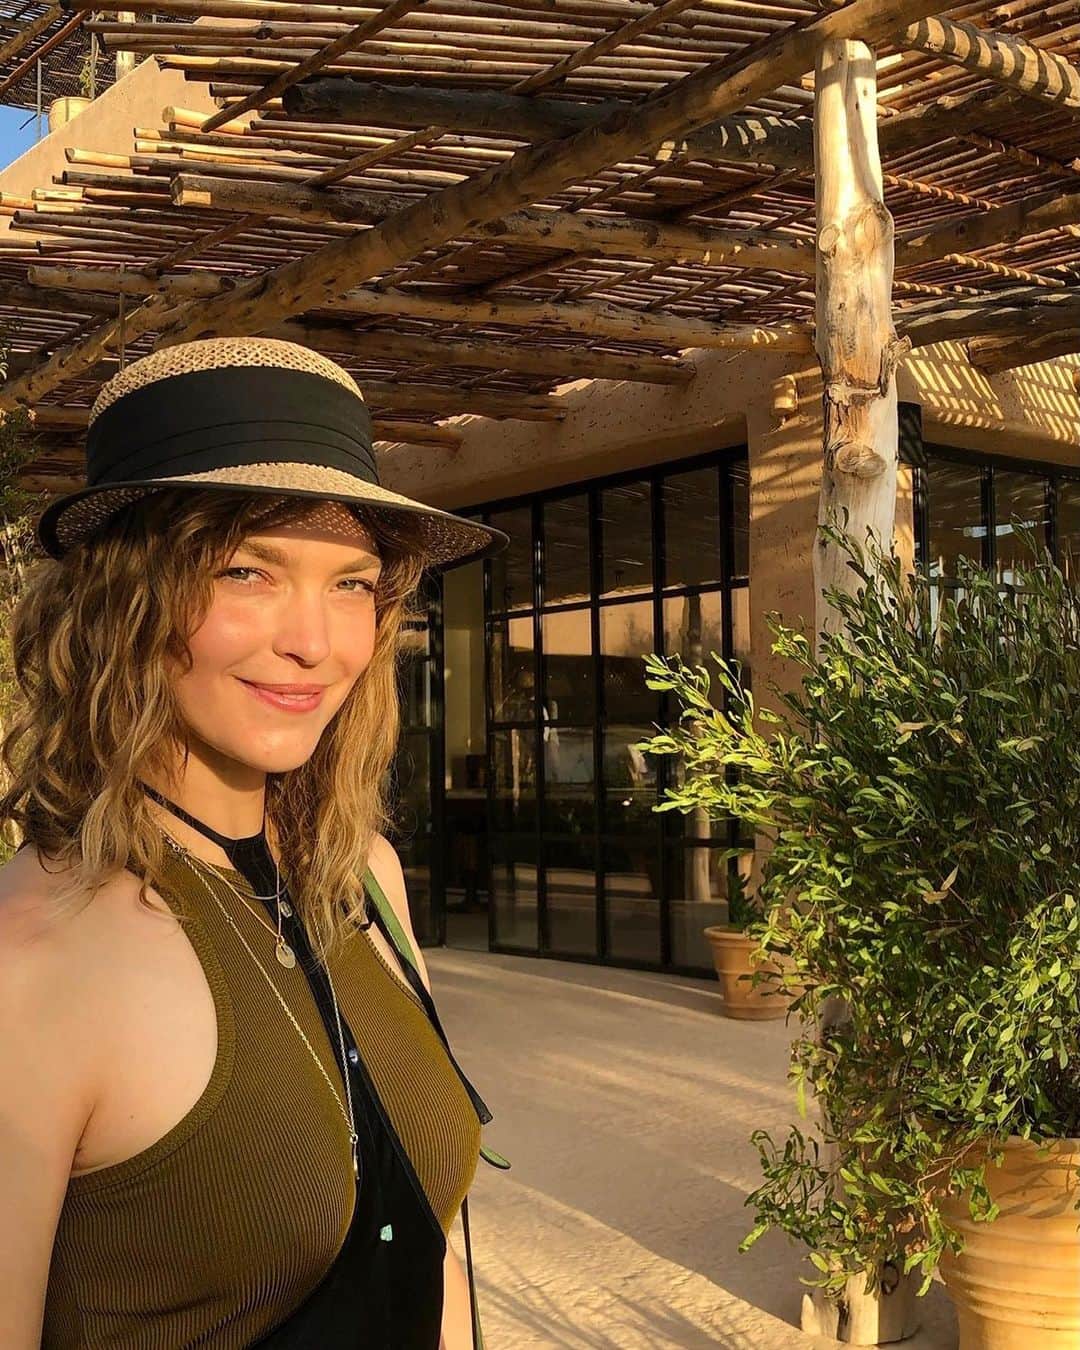 アリゾナ・ミューズのインスタグラム：「I want to talk about this because I realised a little while ago that when sustainability is at the forefront of a business it changes the whole energy of a place. When the intention is to help the planet, support the local community and live alongside nature as part of the landscape it feels connected and human.  I am in love with @sixsenses_ibiza 🌿  It’s a new hotel here in Ibiza and a very special one at that. It is the first sustainable BREEAM certified resort and residential community in the Balearics. You can see and feel sustainability is at the heart of every single thing they do and this makes me so HAPPY.  This hotel has a farm located 15 minutes away from the resort where their Farmer, Kobi, grows the food for their vegetarian restaurant. It’s all organic, seasonal and responsibly sourced which makes you feel so sustained and nourished 🥬  They produce their own natural fertilizers and herbicides to help their vegetables and fruits grow in a healthy way 🌱  The composting site feeds the farm’s soil and the hotel educates children and grown-ups about the importance of composting their own green waste 👏  Herbs are harvested and distilled on-site to extract essential oils used in spa treatments 🌿  They maintain beehives for honey harvesting and to stimulate local crop growth from pollination 🐝  Their goats process landscaping waste and produce milk for homemade cheeses 🐐  The hotel is powered by renewable energy with plastic free and zero waste targets 💚   You can make your own natural products in their Earth Lab! Like DIY compost and chemical-free detergent or extracting the essential oils from herbs grown in their organic gardens. Children can join in foraging, farming and recycling ♻️  Local artisan craftsmanship follows you throughout the hotel, and so much attention and thoughtfulness has been paid to every detail.   More amazing news is that @agora.ibiza has just opened this week at the hotel - a centre for sustainable fashion at the hotel, curated by @tiffdarke and @danielaagnelli where you can find beautiful sustainable brands like @olisticthelabel and @skiimparis.   Businesses who support the planet feel more like a community 🌎」